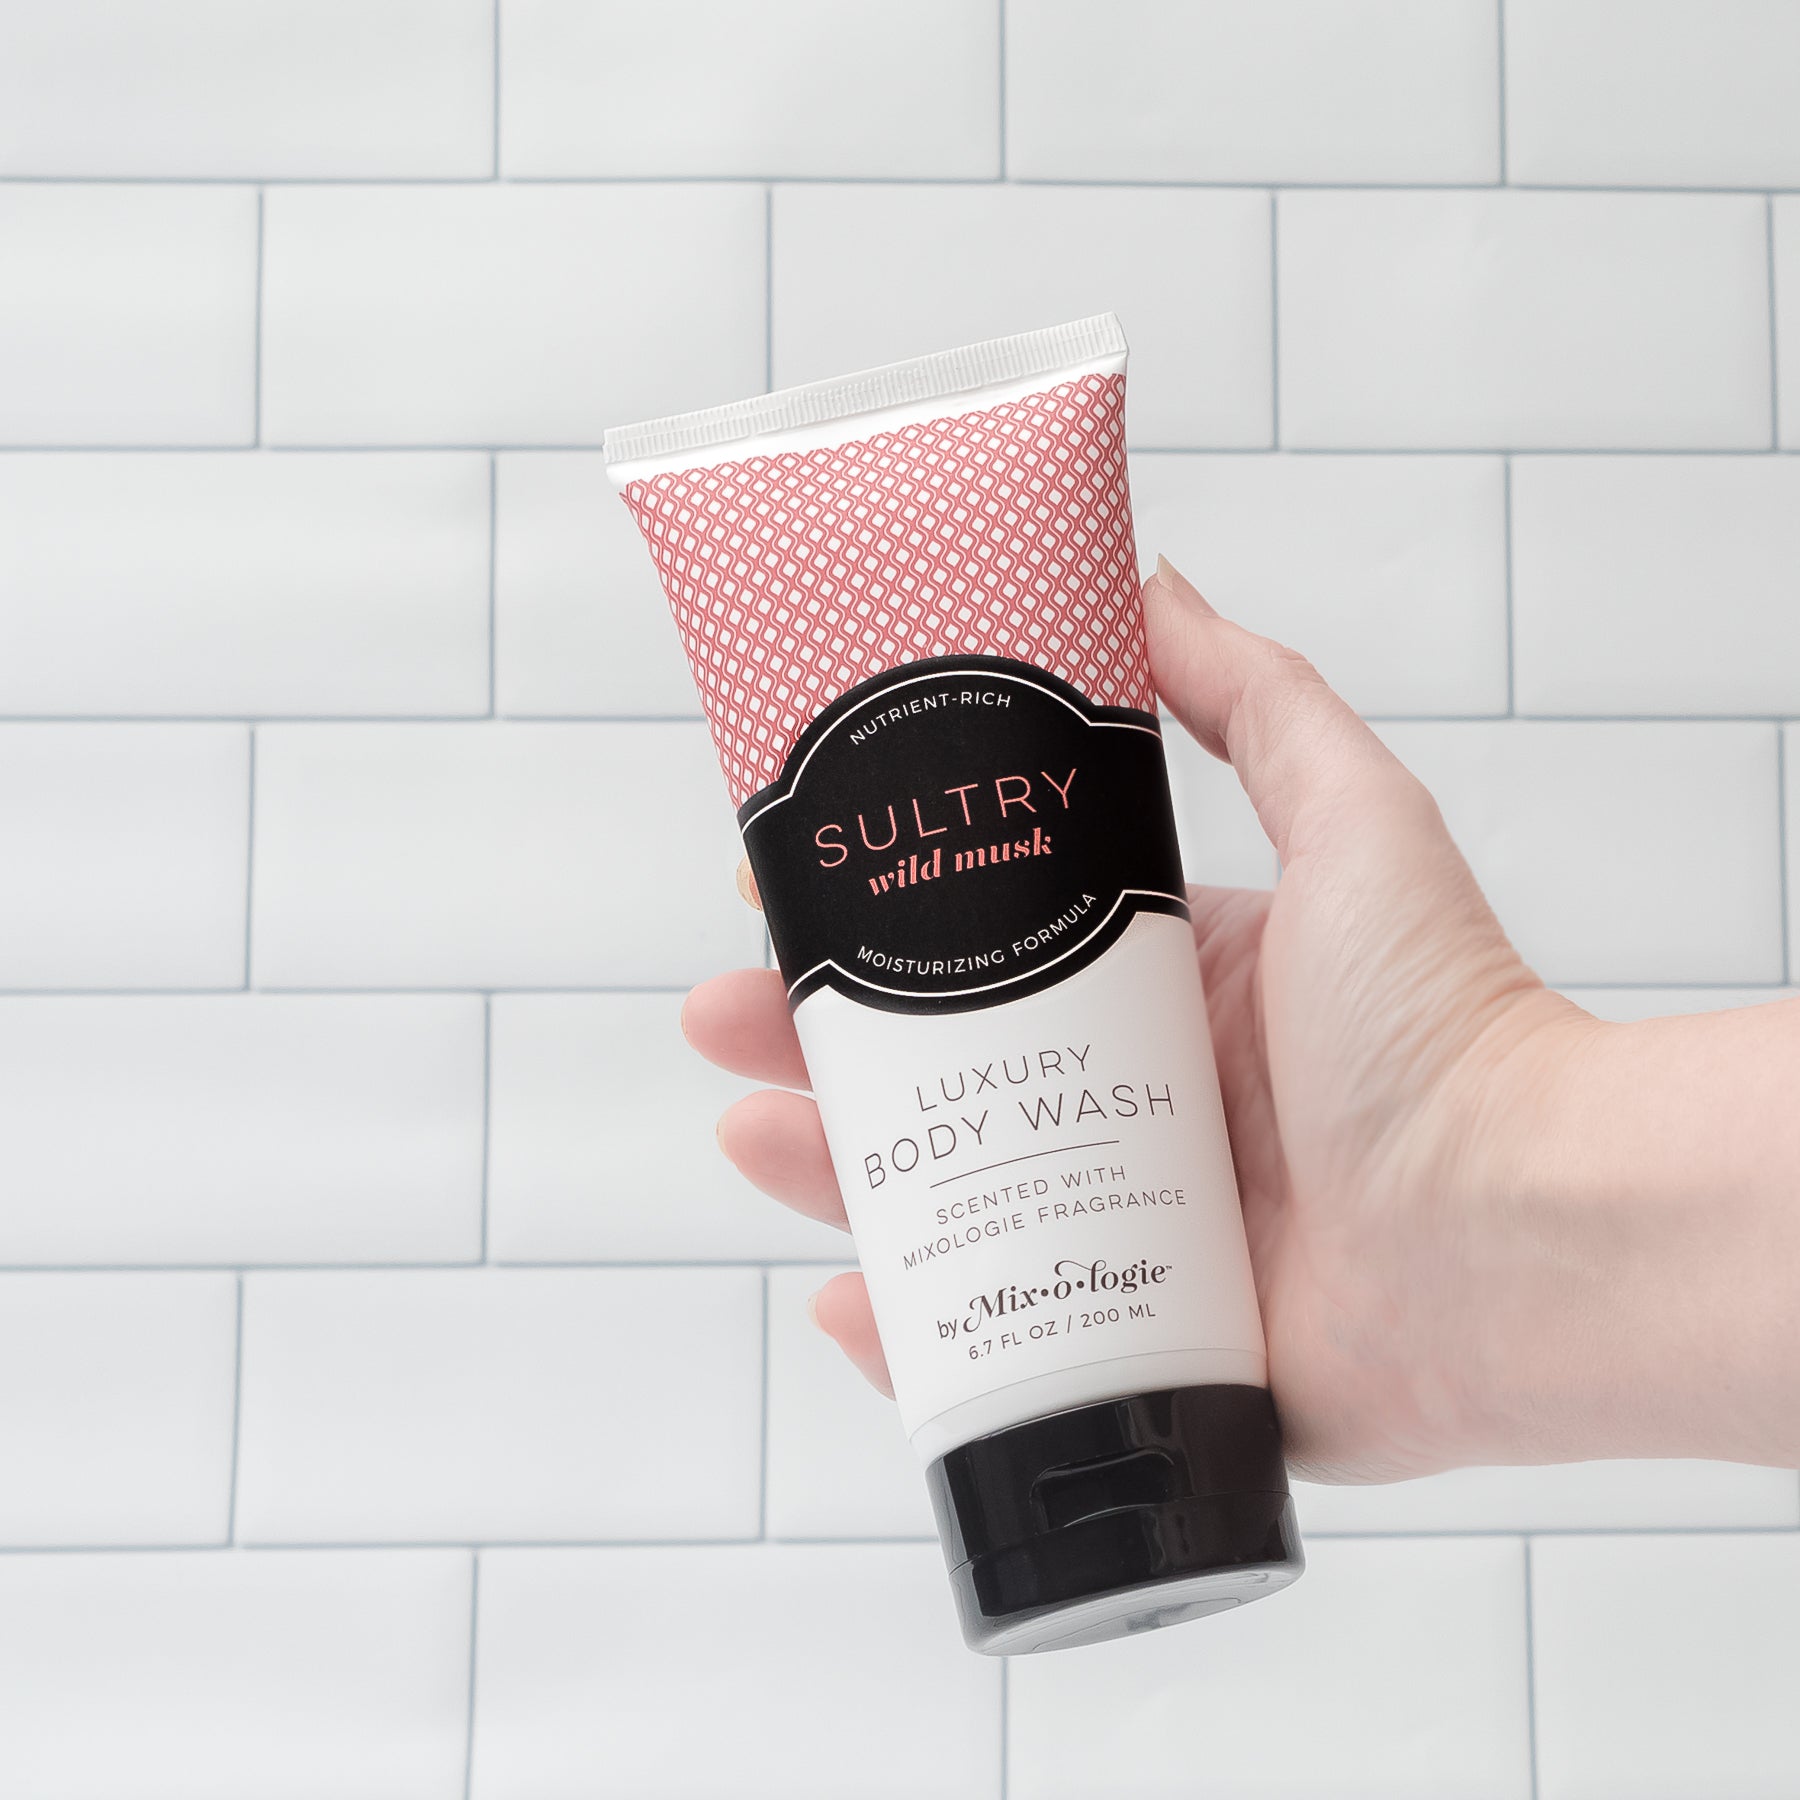 Luxury Body Wash in Mixologie’s Sultry (Wild Musk) in red color sample package with black label. Contains 6.7 fl oz or 200 mL pictured on a white tile background. 